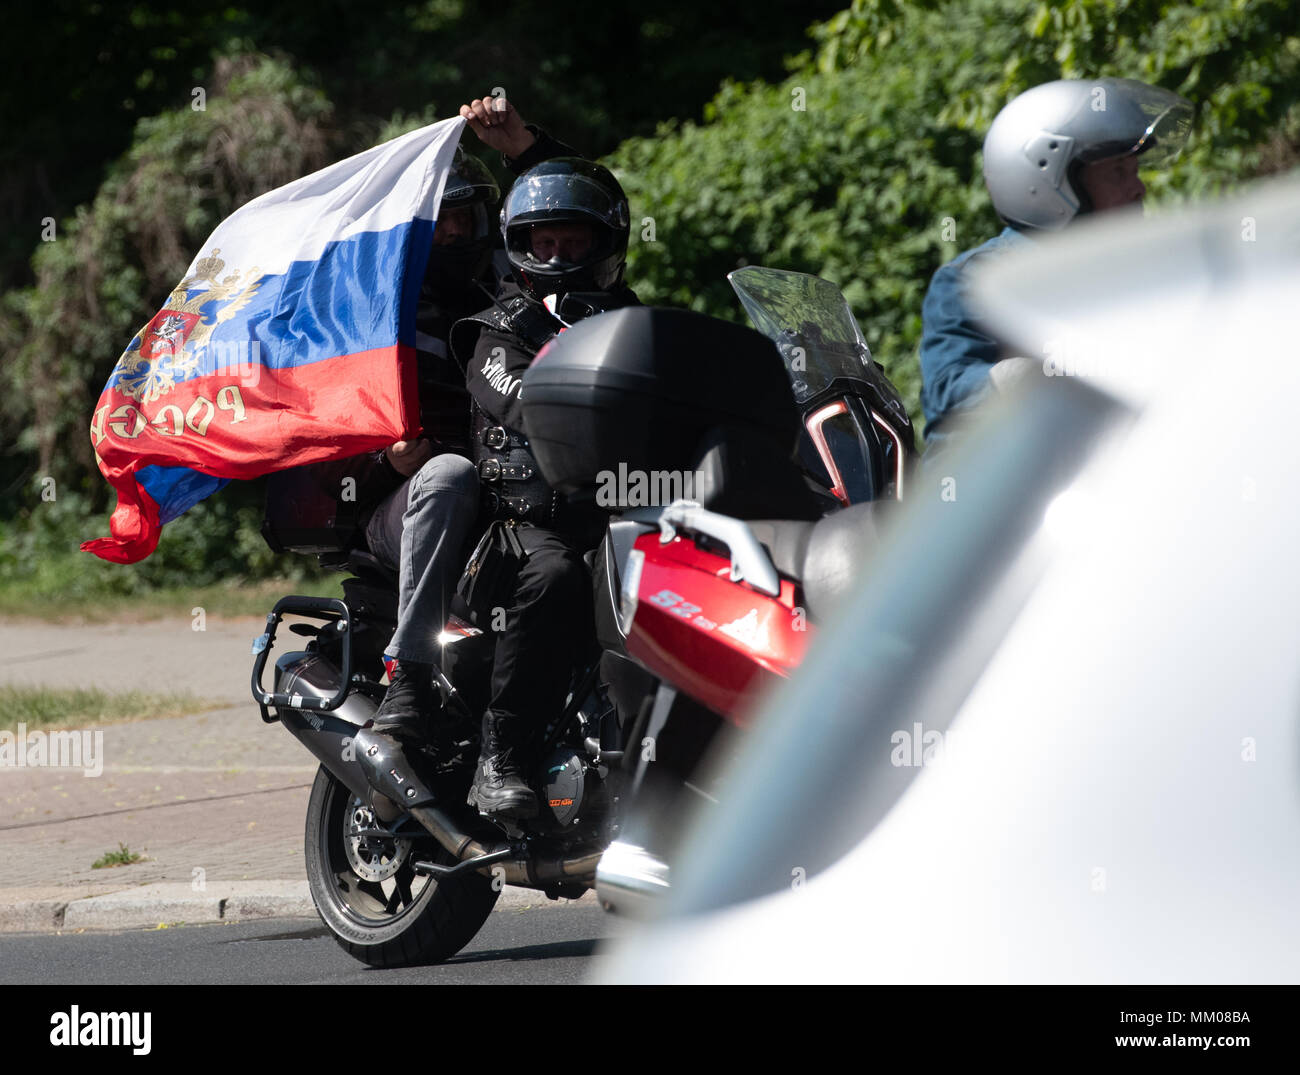 09 May 2018, Germany, Berlin: The Russian motorcycle gang 'Night Wolves' driving through Berlin on 'Victory Day'. Russia and the other former Soviet republics pay tribute to the victory over Hitler's Germany of 1945 on 09 May. Photo: Paul Zinken/dpa Stock Photo